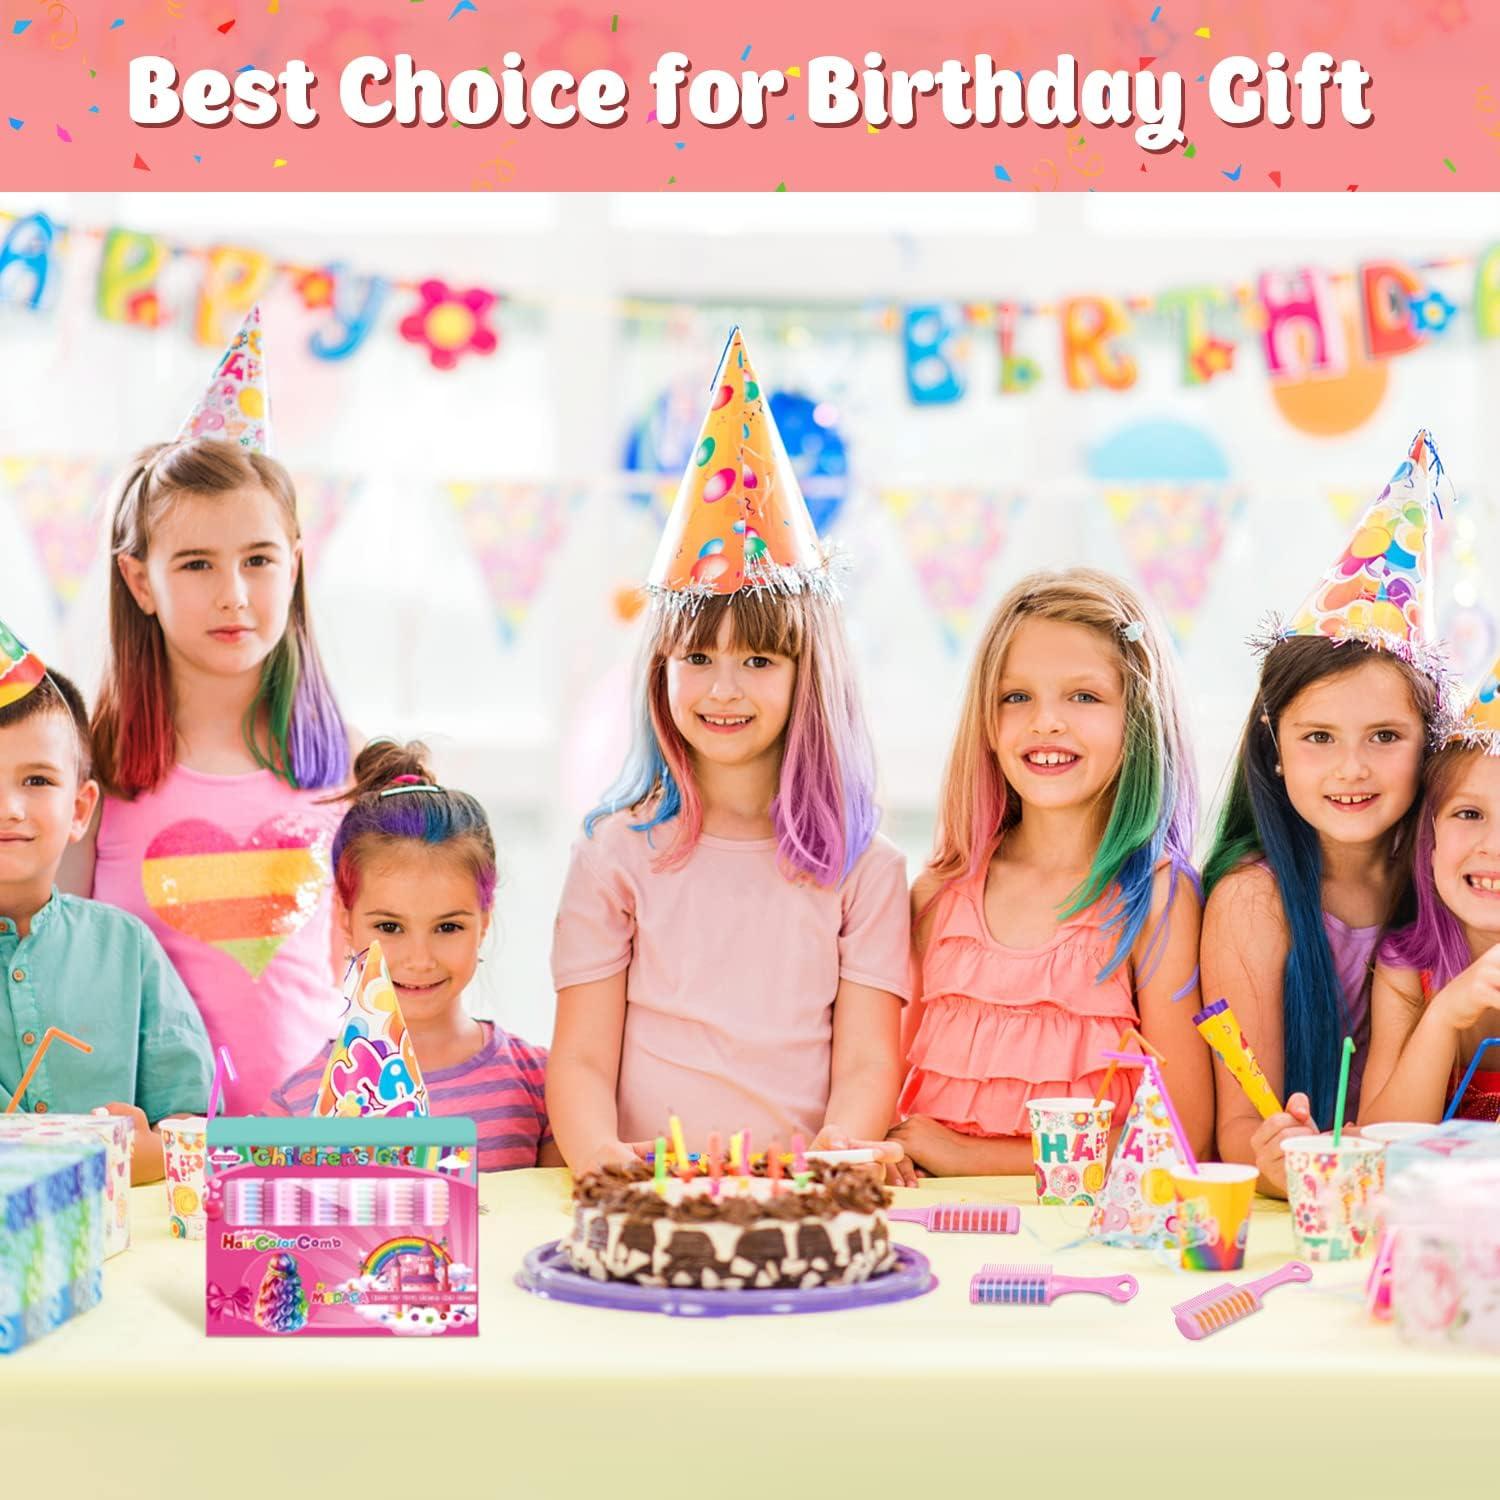 Birthday gifts in a jar for kids also saving for all the 